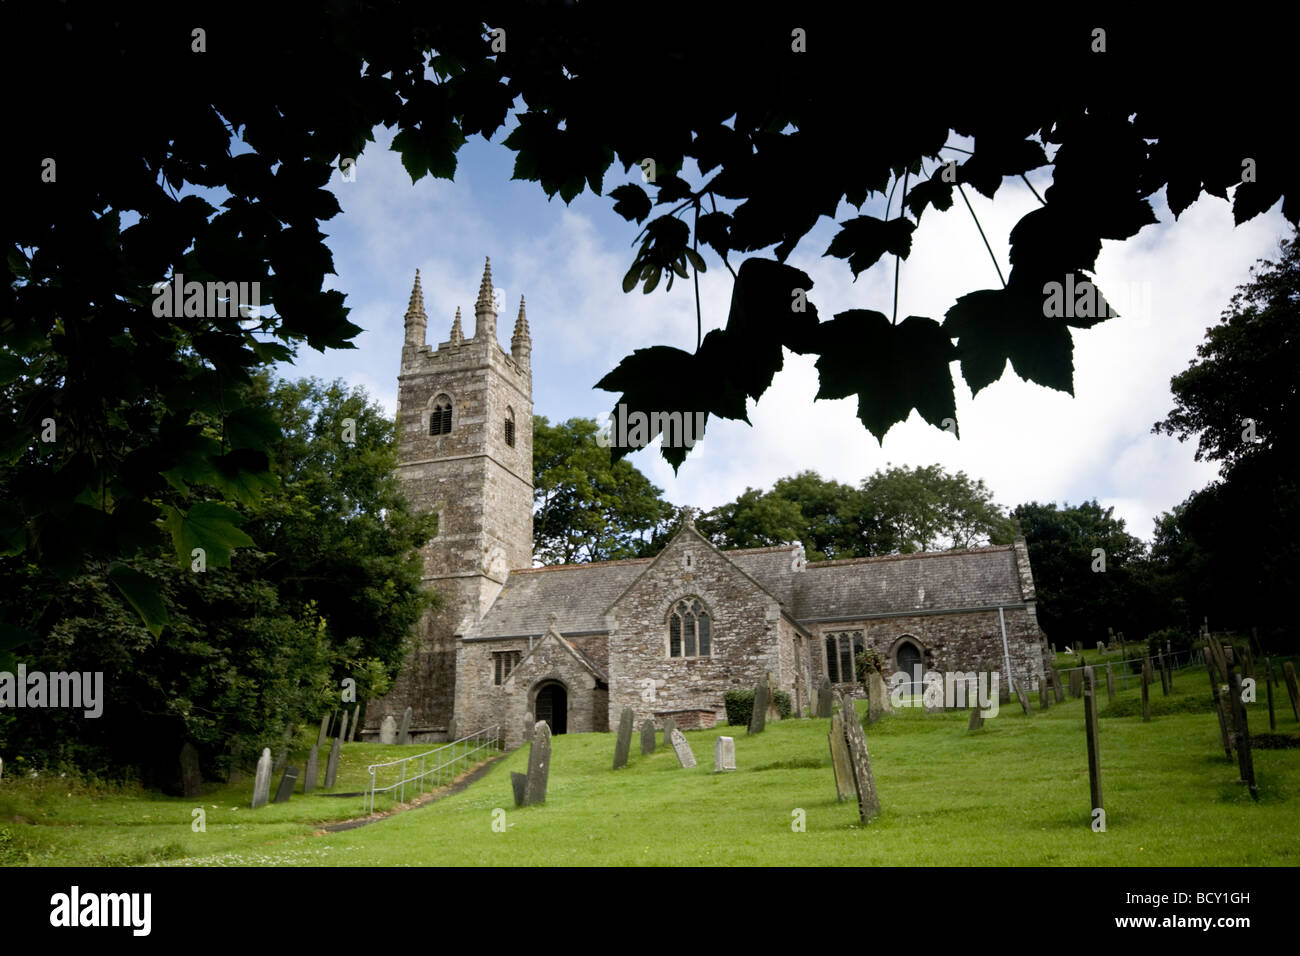 The parish church of Poundstock: St Winwaloe in the Anglican Diocese of Truro and county of Cornwall England. Stock Photo